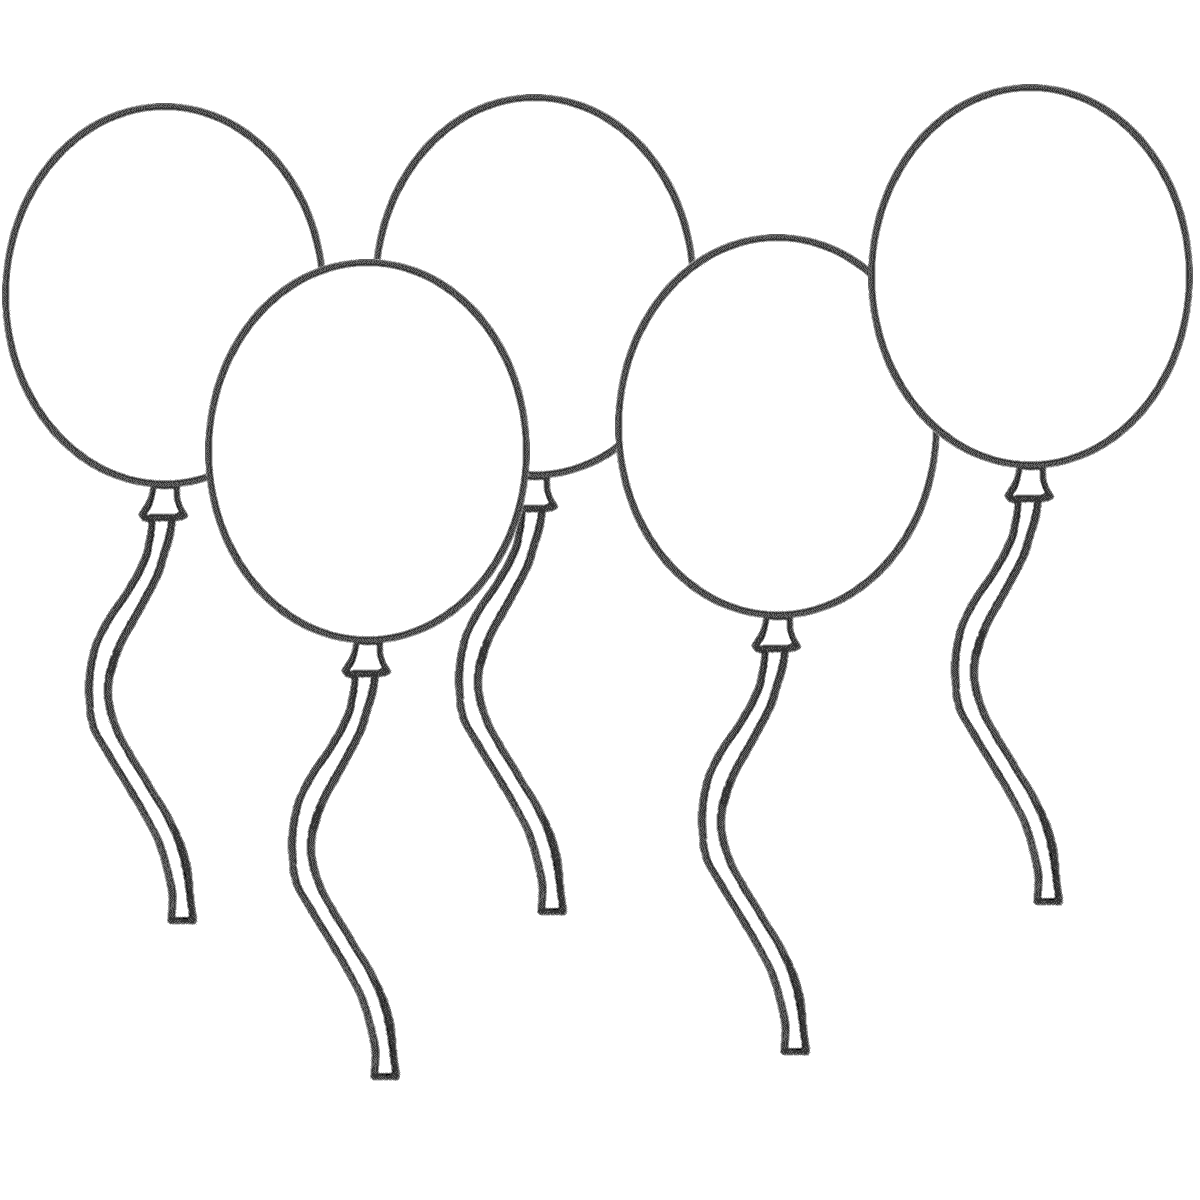 Birthday Balloon Coloring Page - Coloring Home